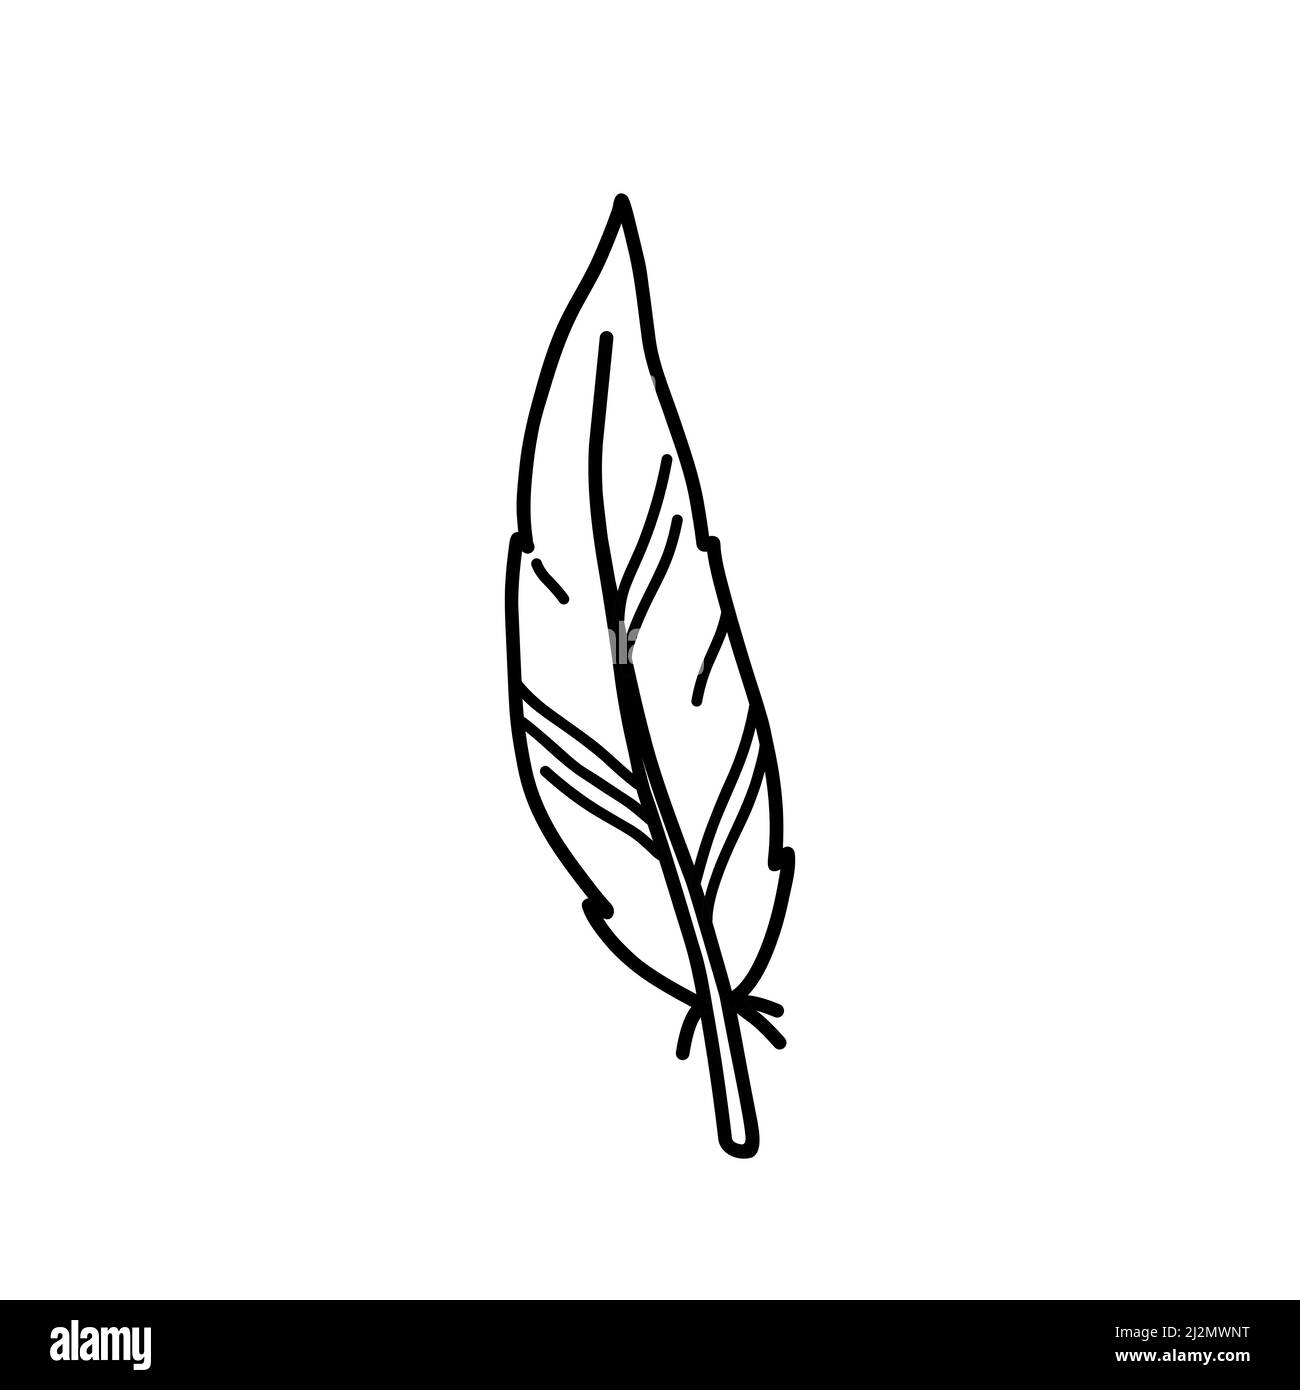 Bird feather isolated on white background. Vector hand-drawn illustration in doodle style. Perfect for cards, decorations, logo, various designs. Stock Vector